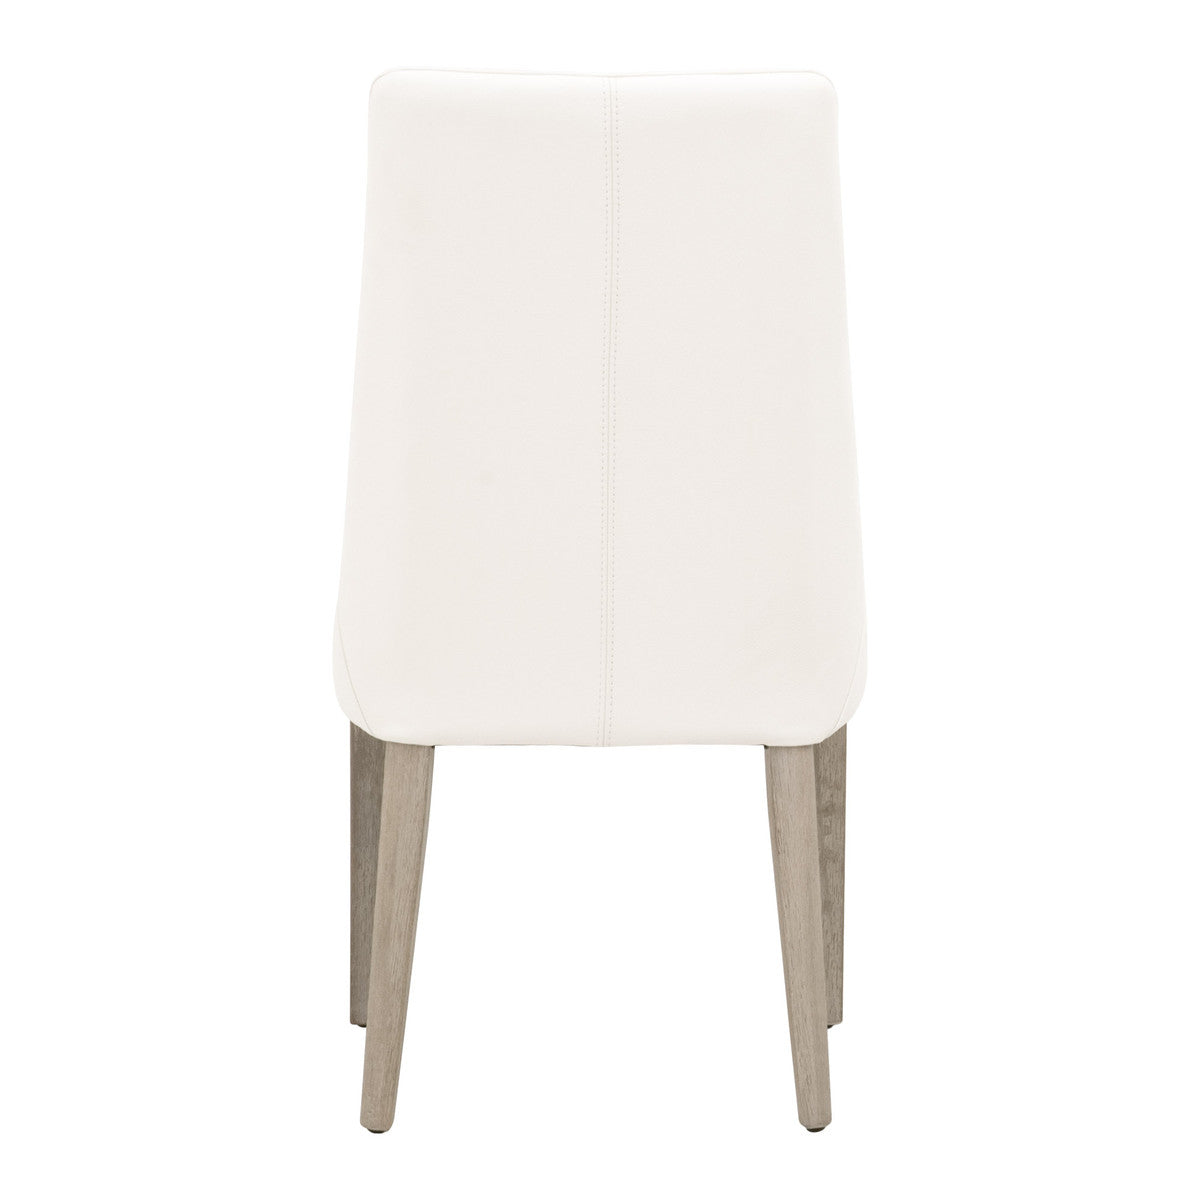 Aura Dining Chair - Set of (2)